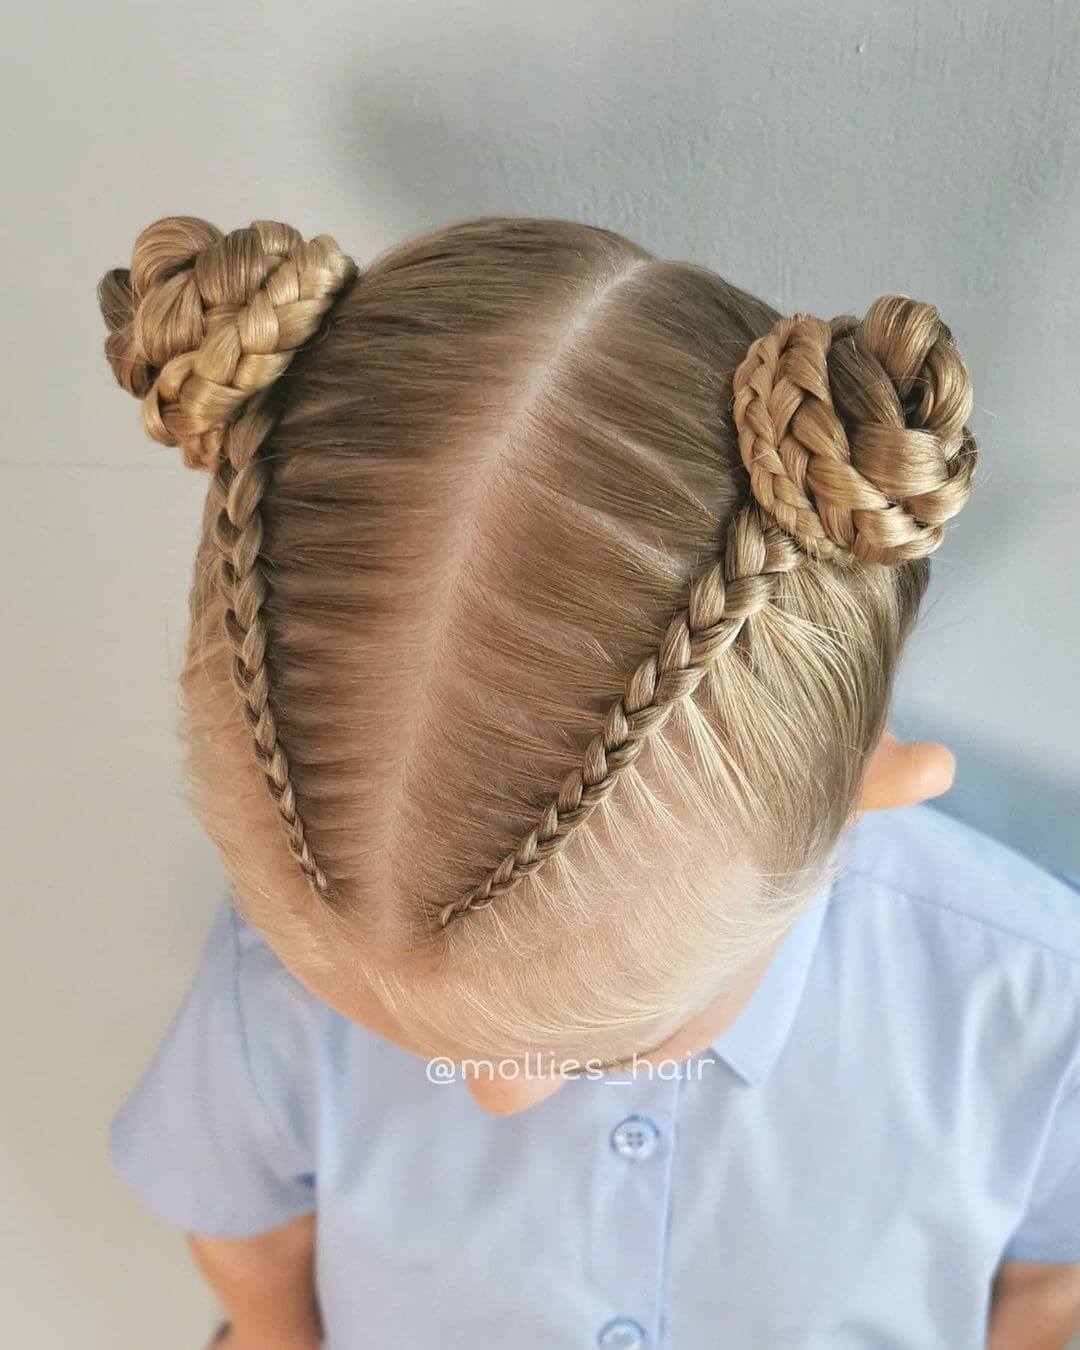 Braids for kids with long hair Knotted braided buns for kids